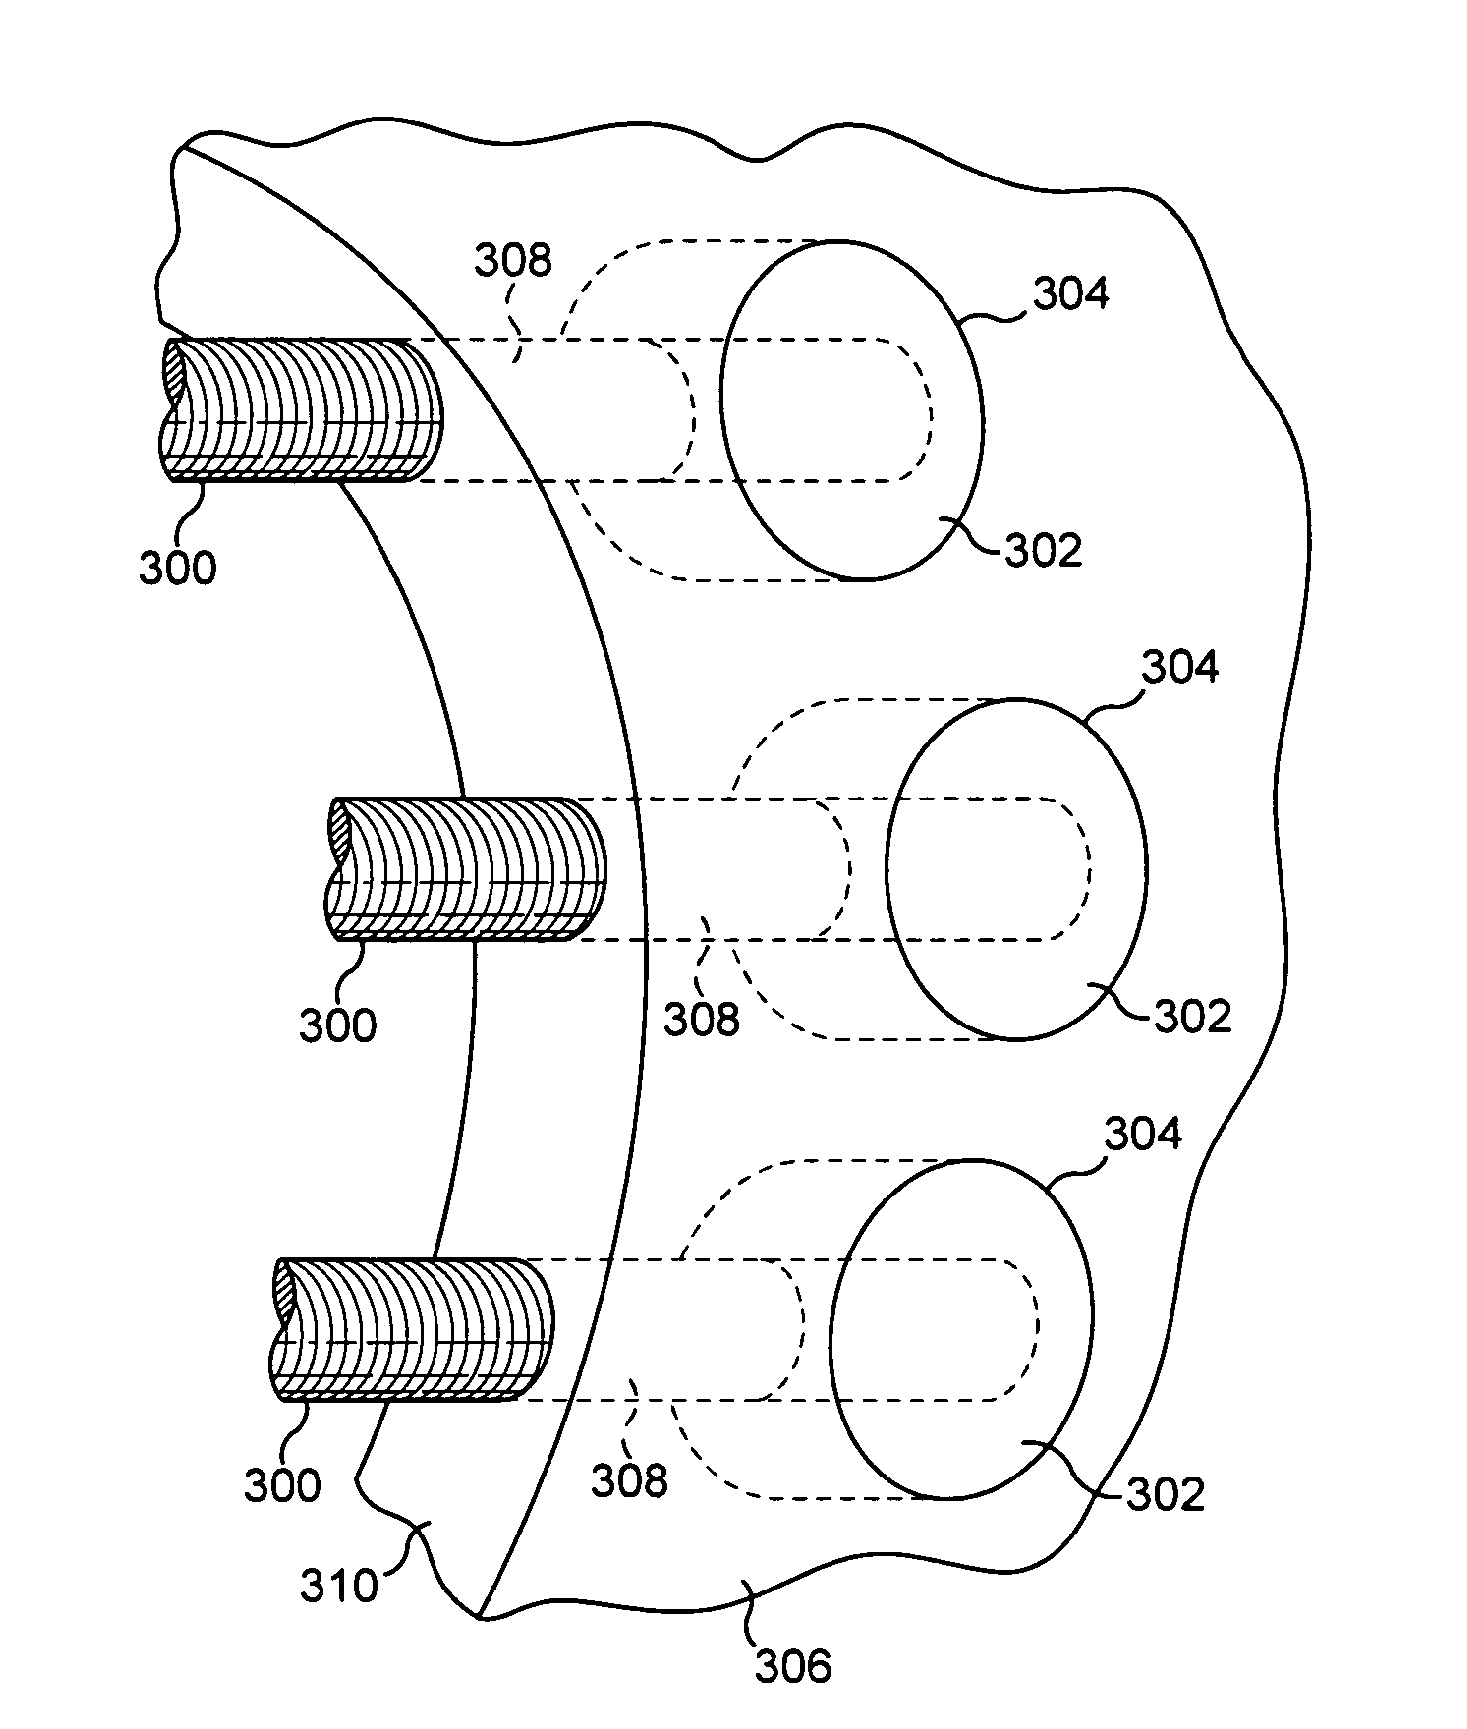 Wind or tidal turbine blade having an attachment